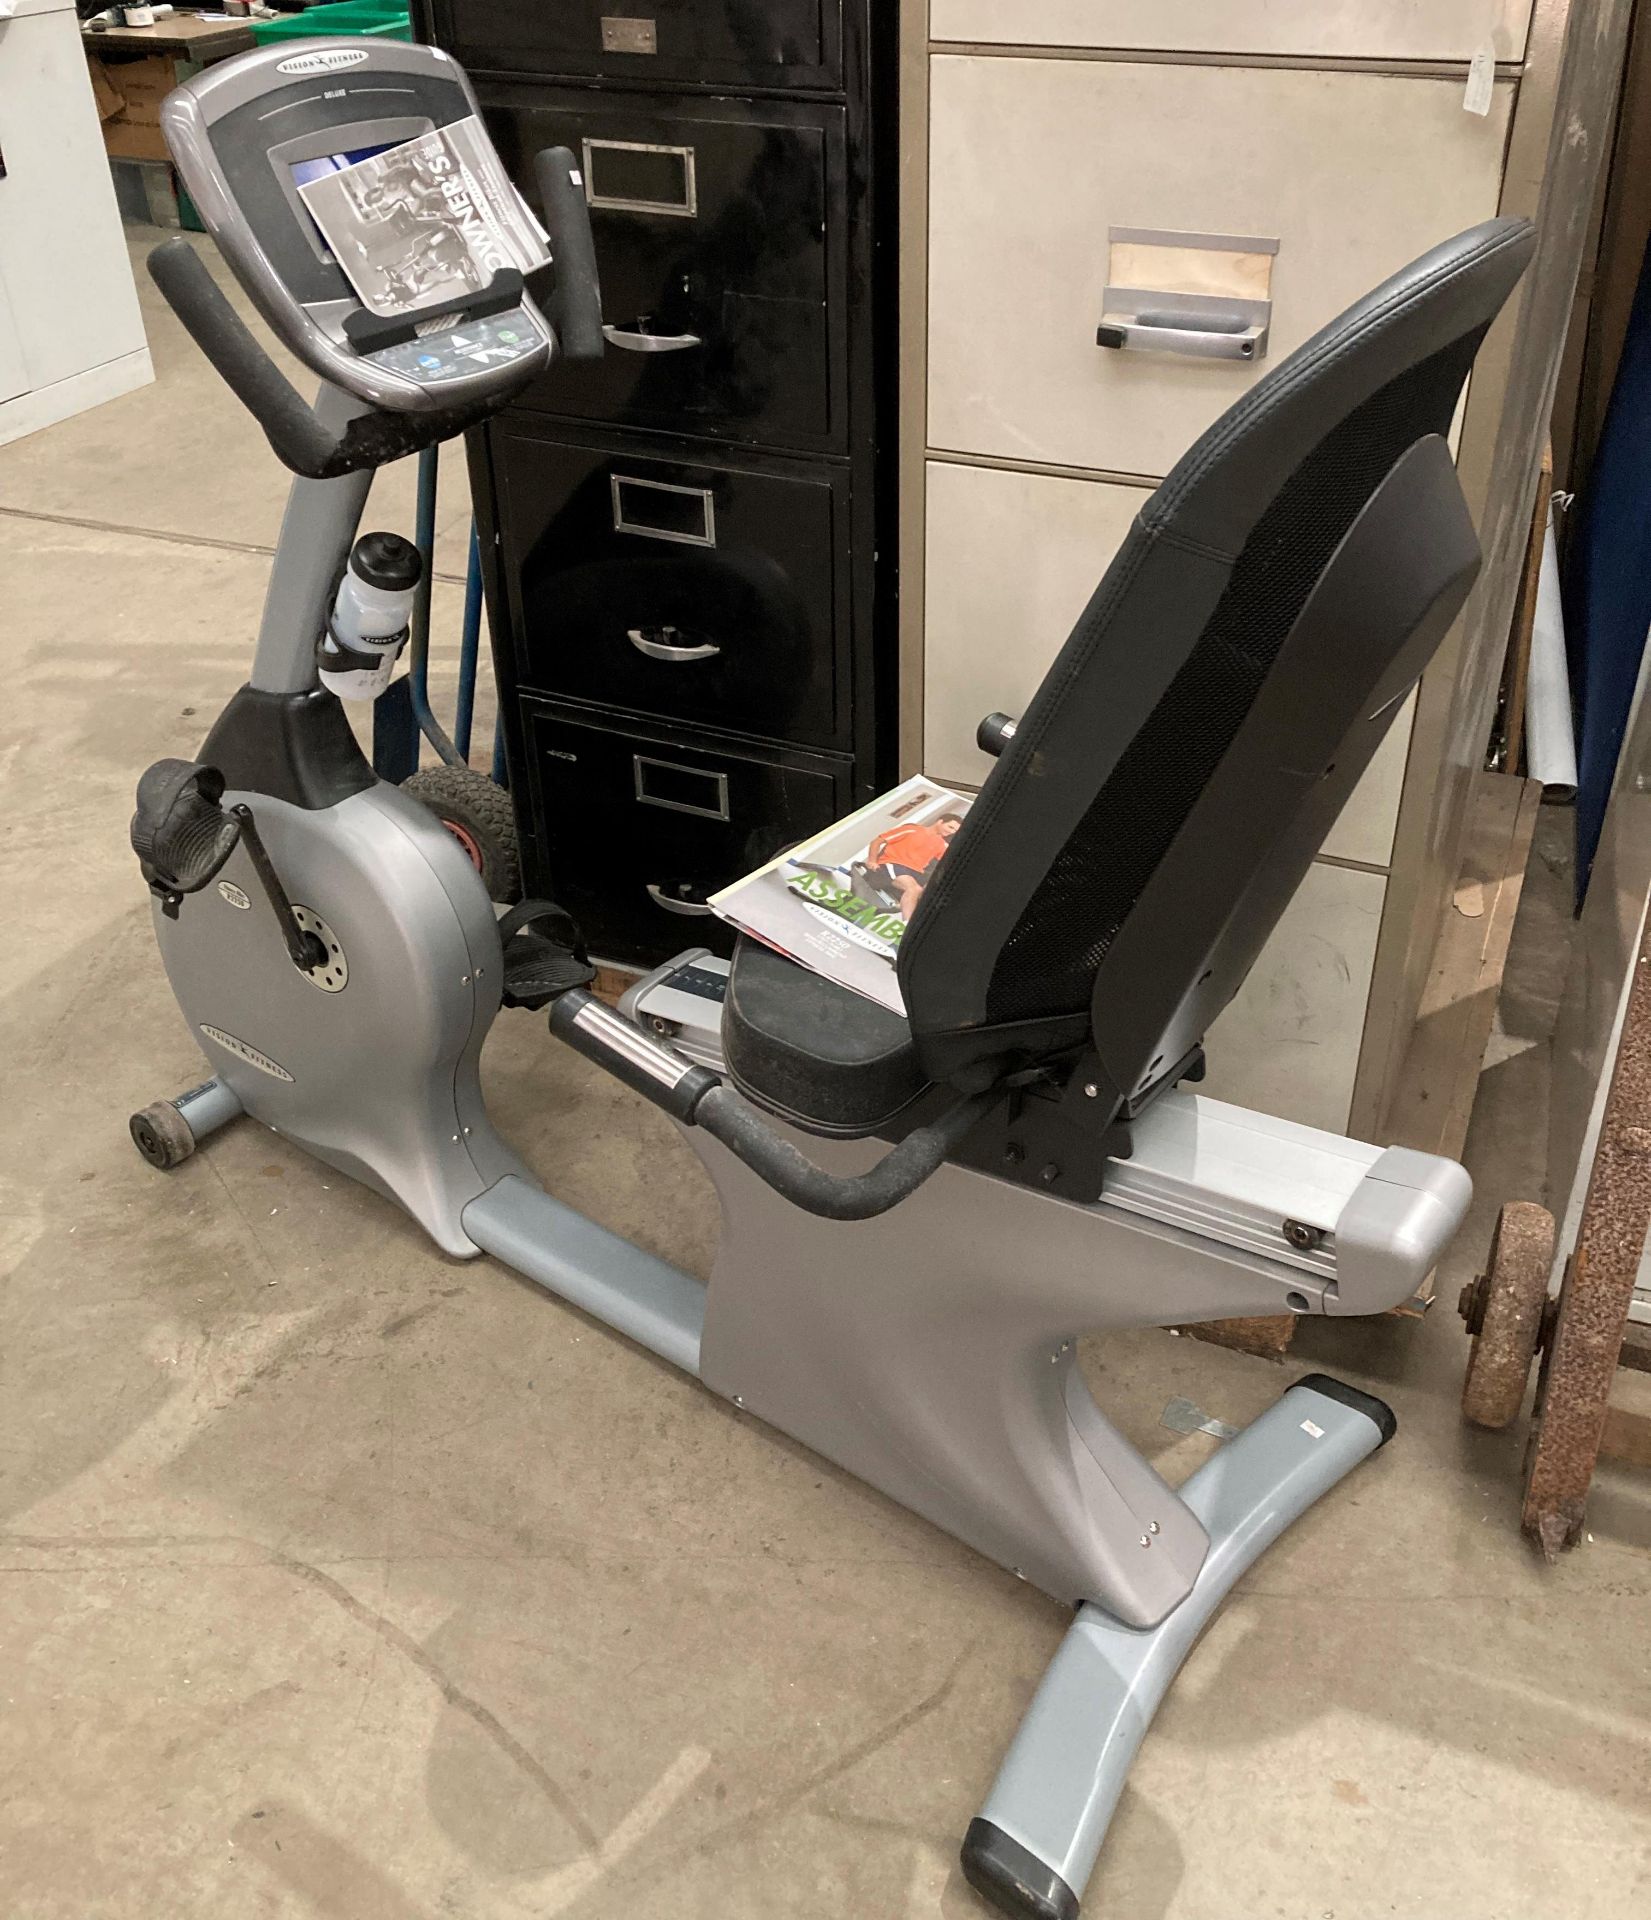 A Vision Fitness R2250 step-thru semi recumbent fitness bike with digital read out and manual